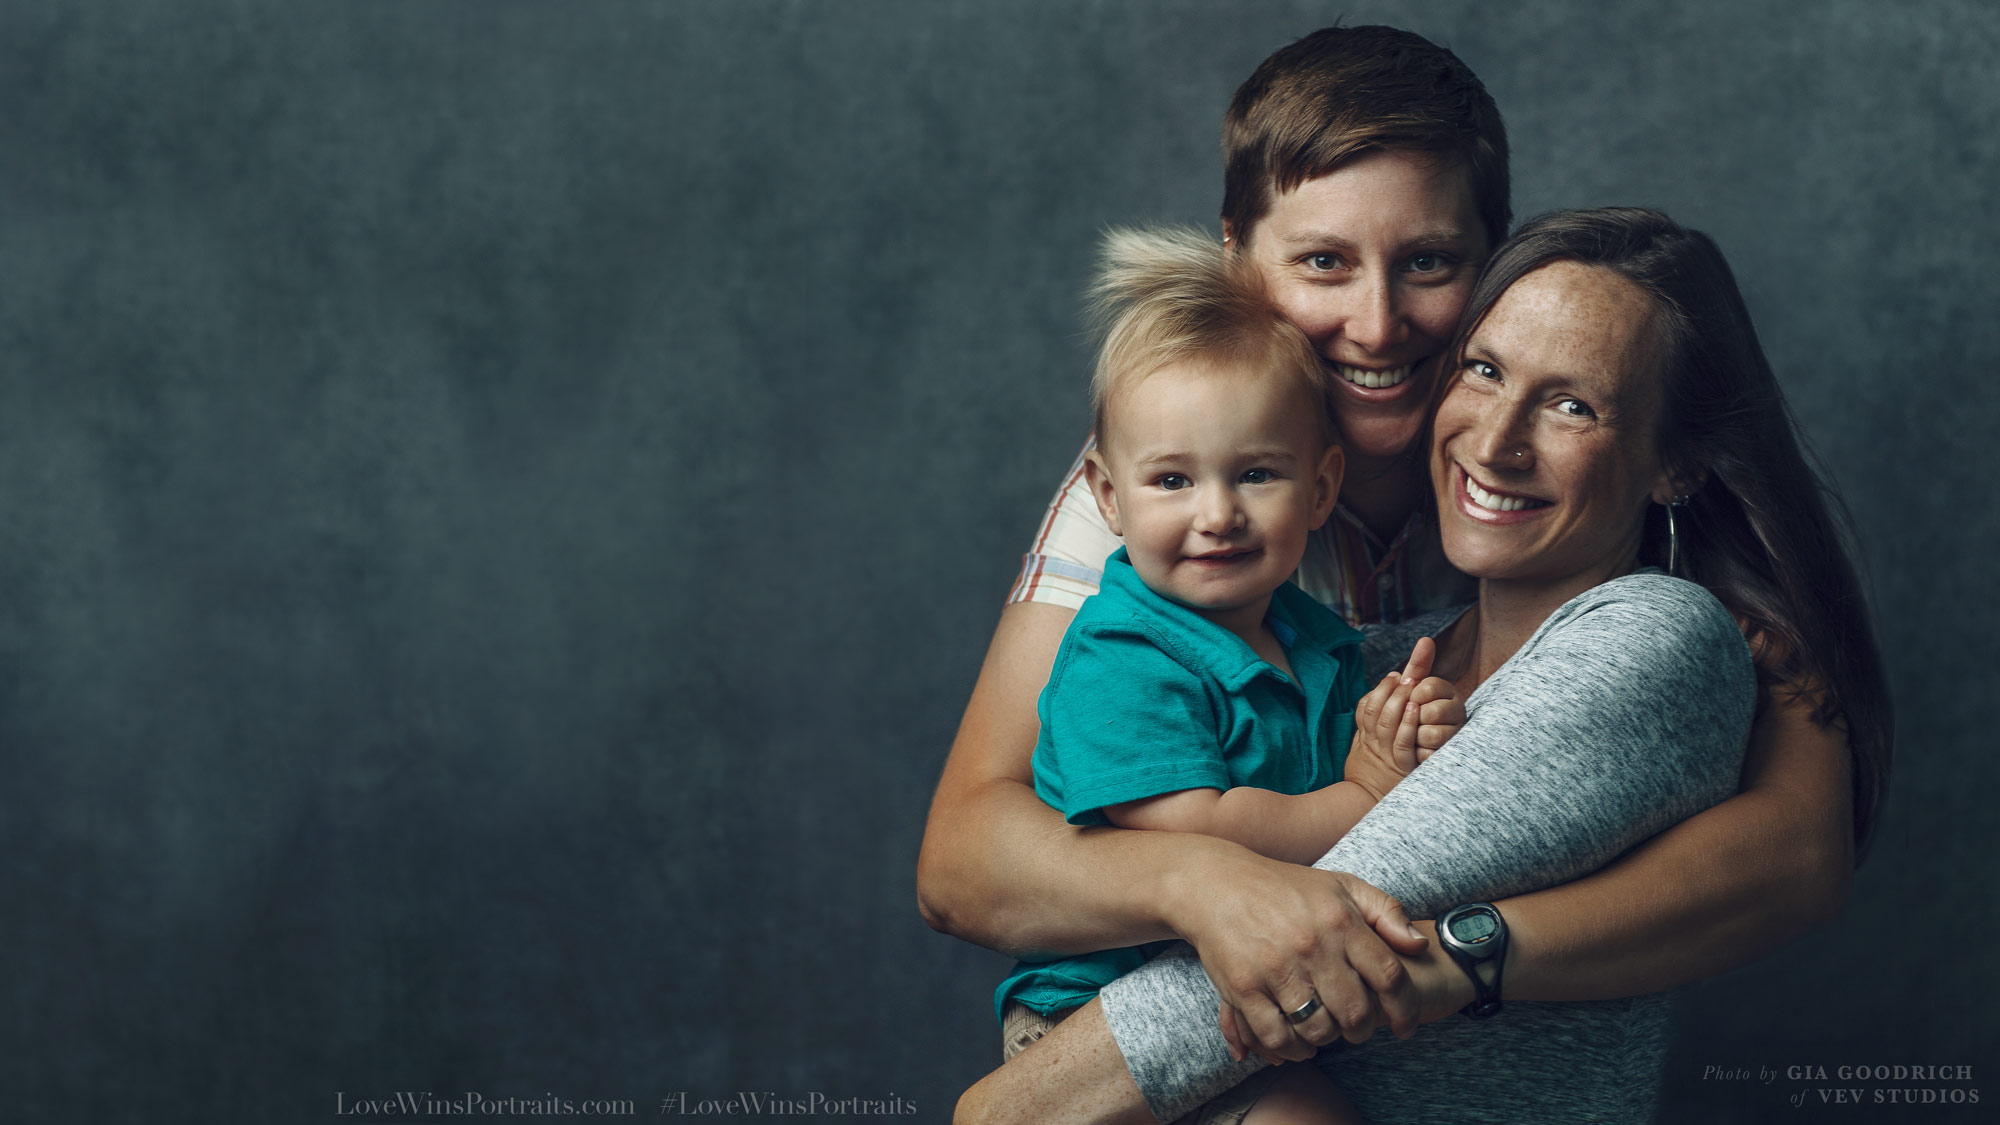 love-wins-portraits-lgbtq-married-engaged-couples-photographic-archive-by-gia-goodrich-oregon-beth-and-olivia